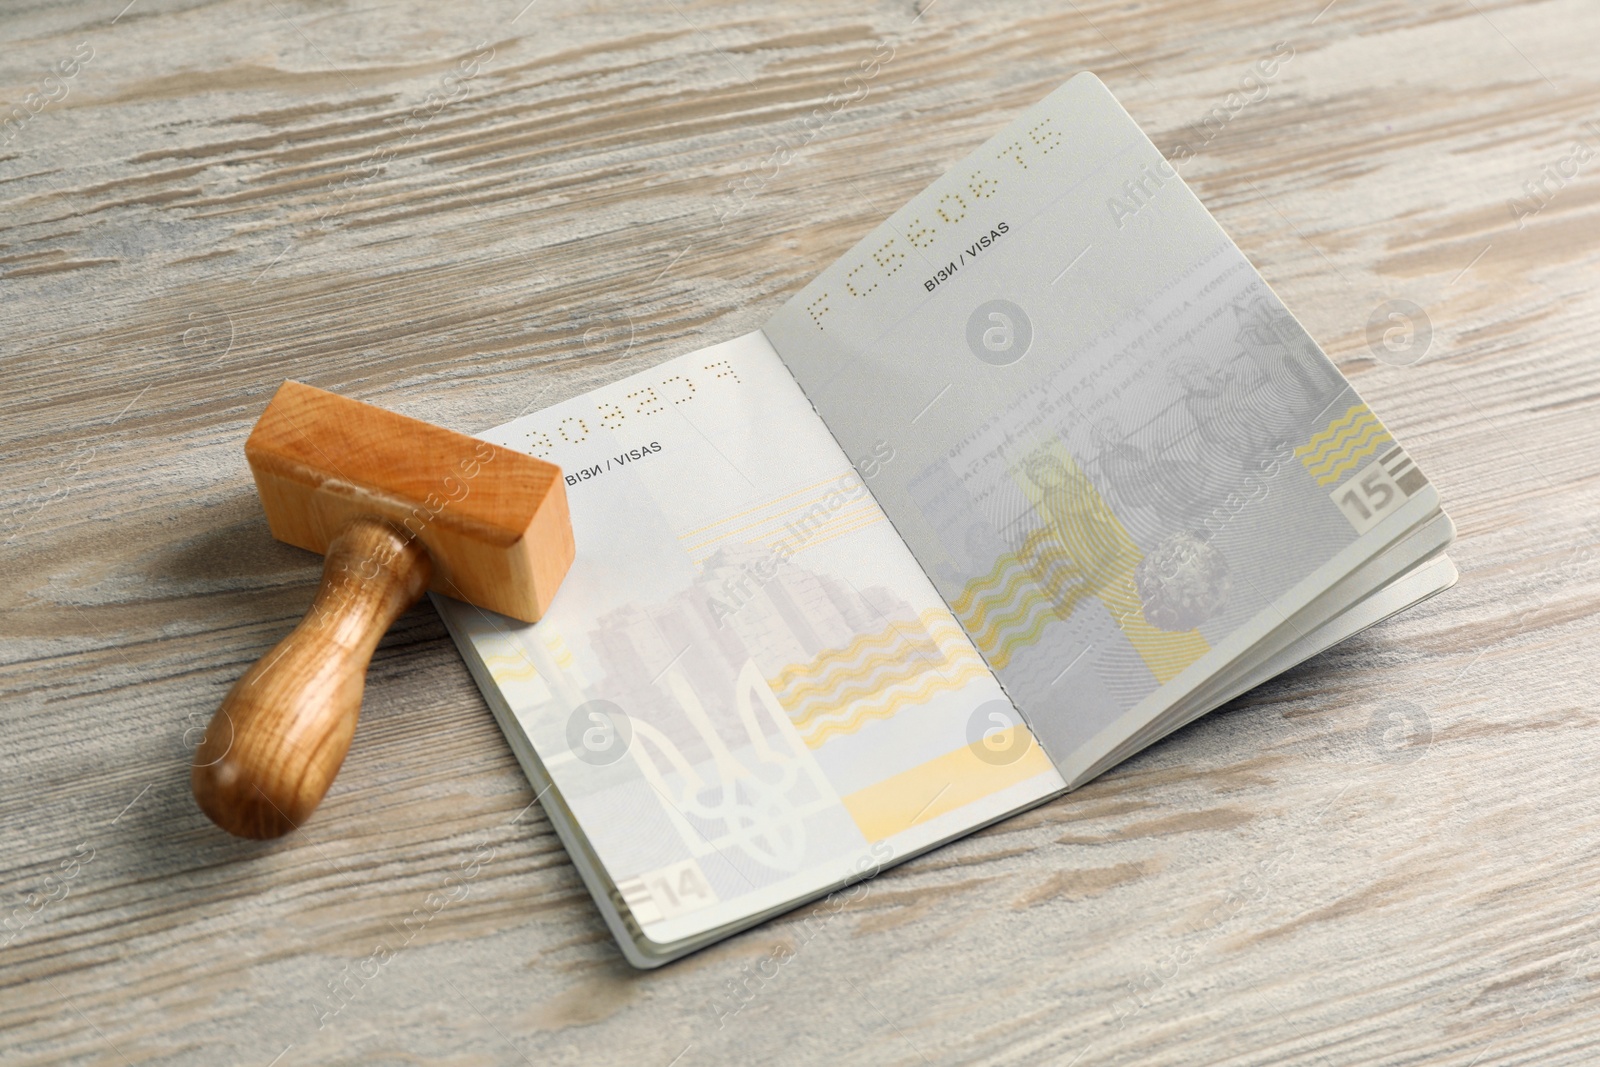 Photo of Moldova, Ceadir-Lunga - June 13, 2022: Passport and stamp on wooden table